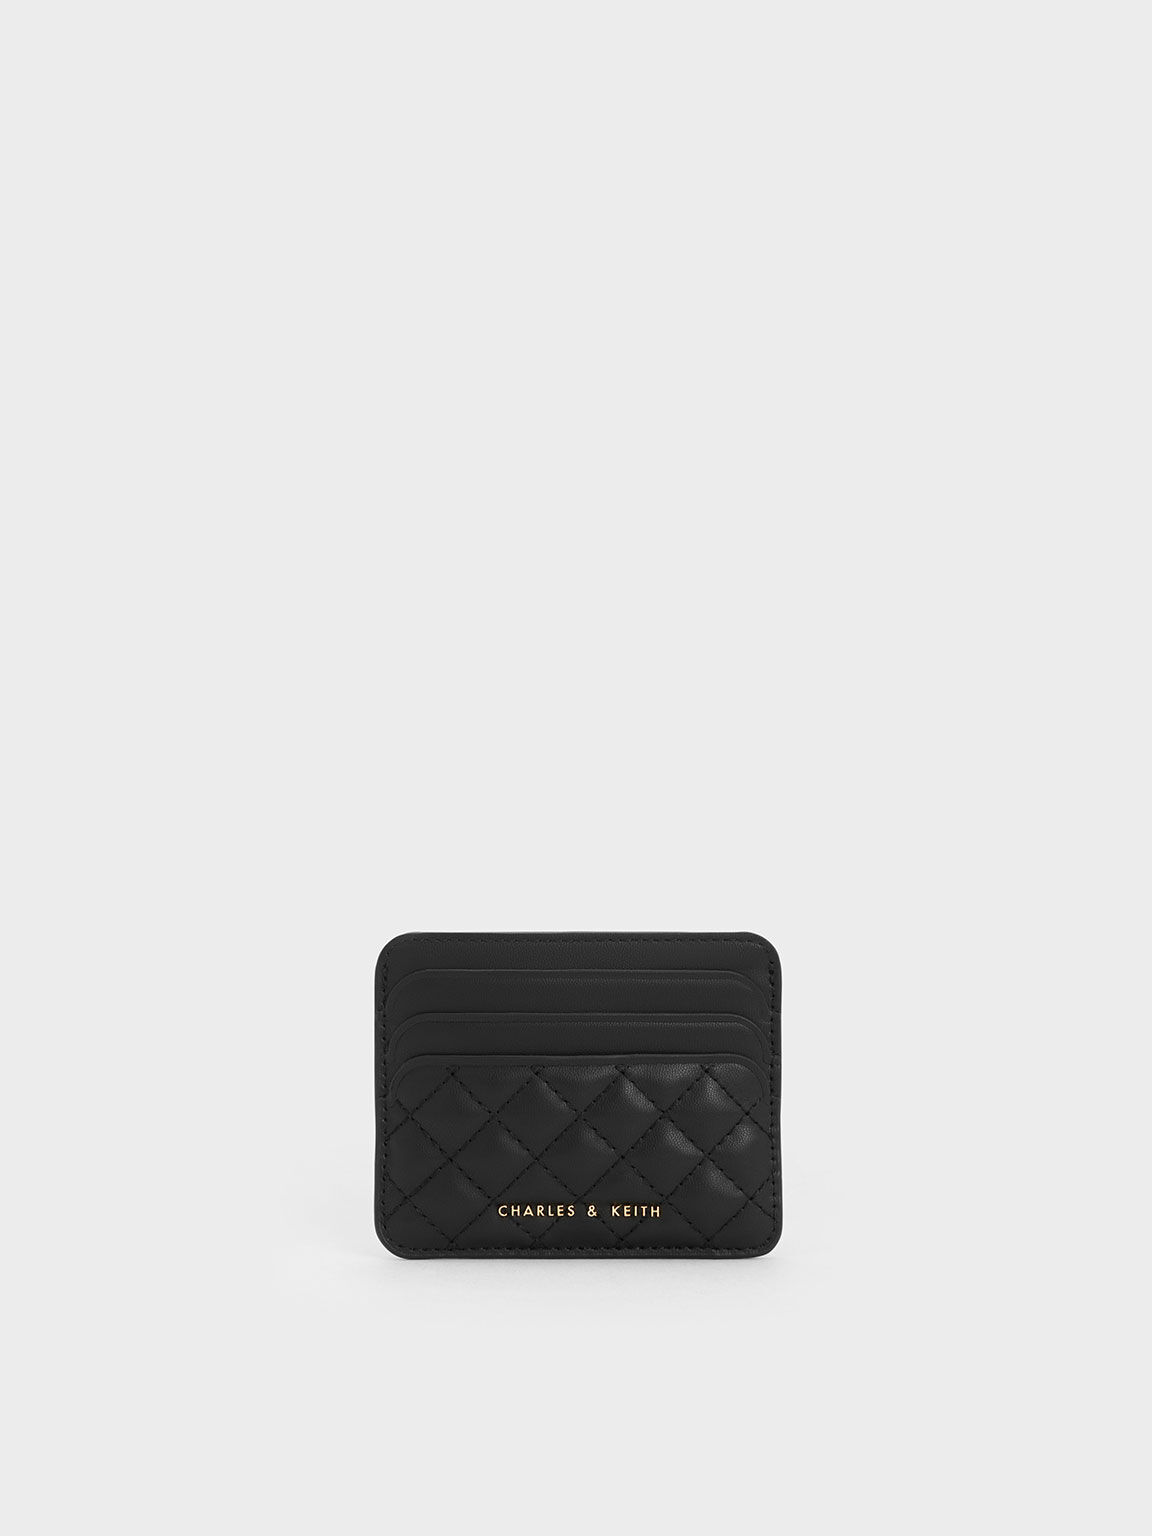 CHARLES & KEITH Braided Strap Card Holder for Women